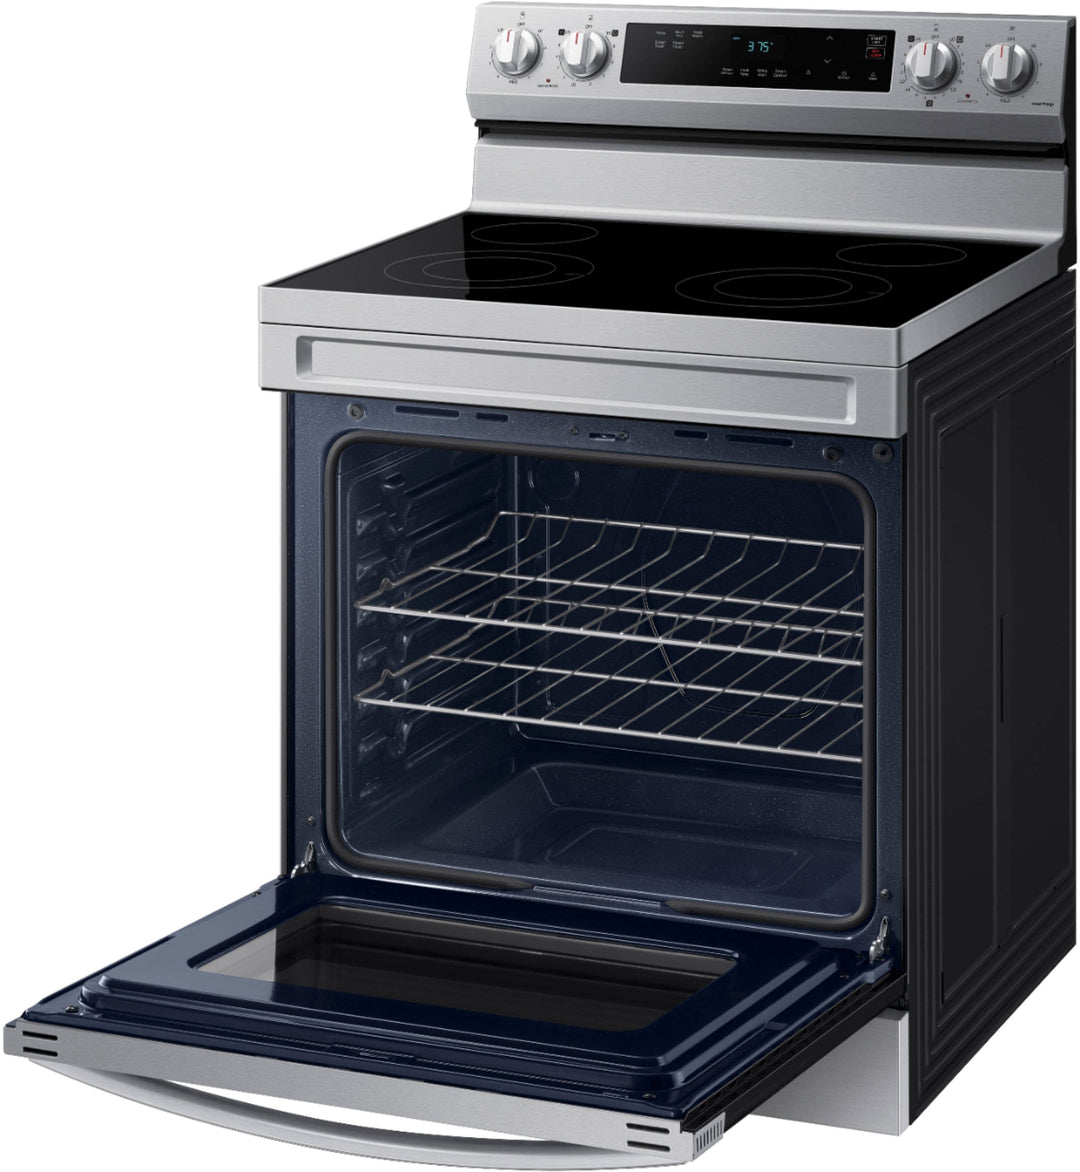 Samsung - 6.3 cu. ft. Freestanding Electric Range with WiFi and Steam Clean - Stainless steel_3